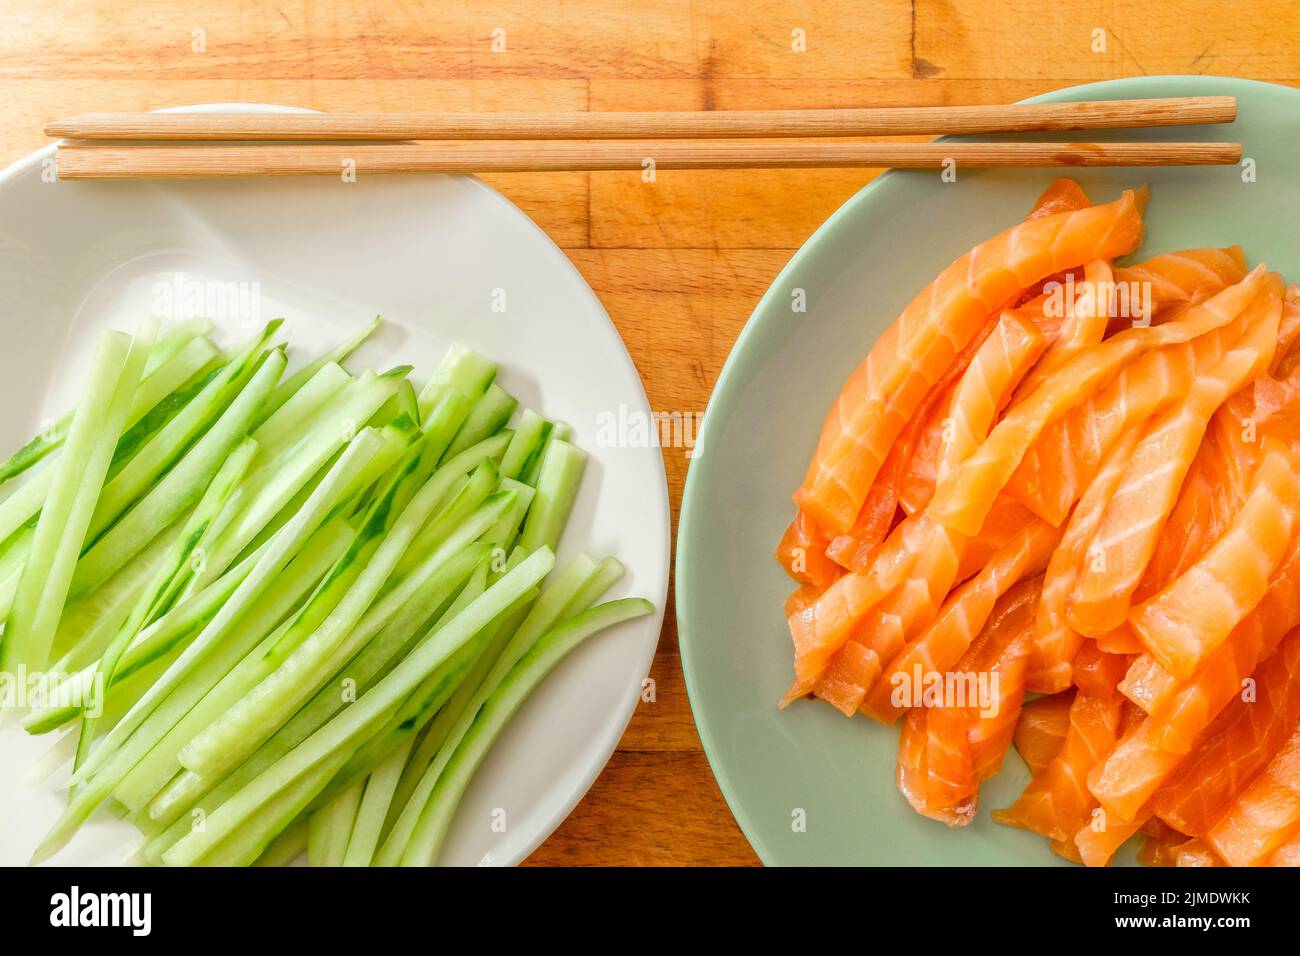 Top view of salmon and fresh cucumber slices on plates and bamboo chopsticks. Stock Photo